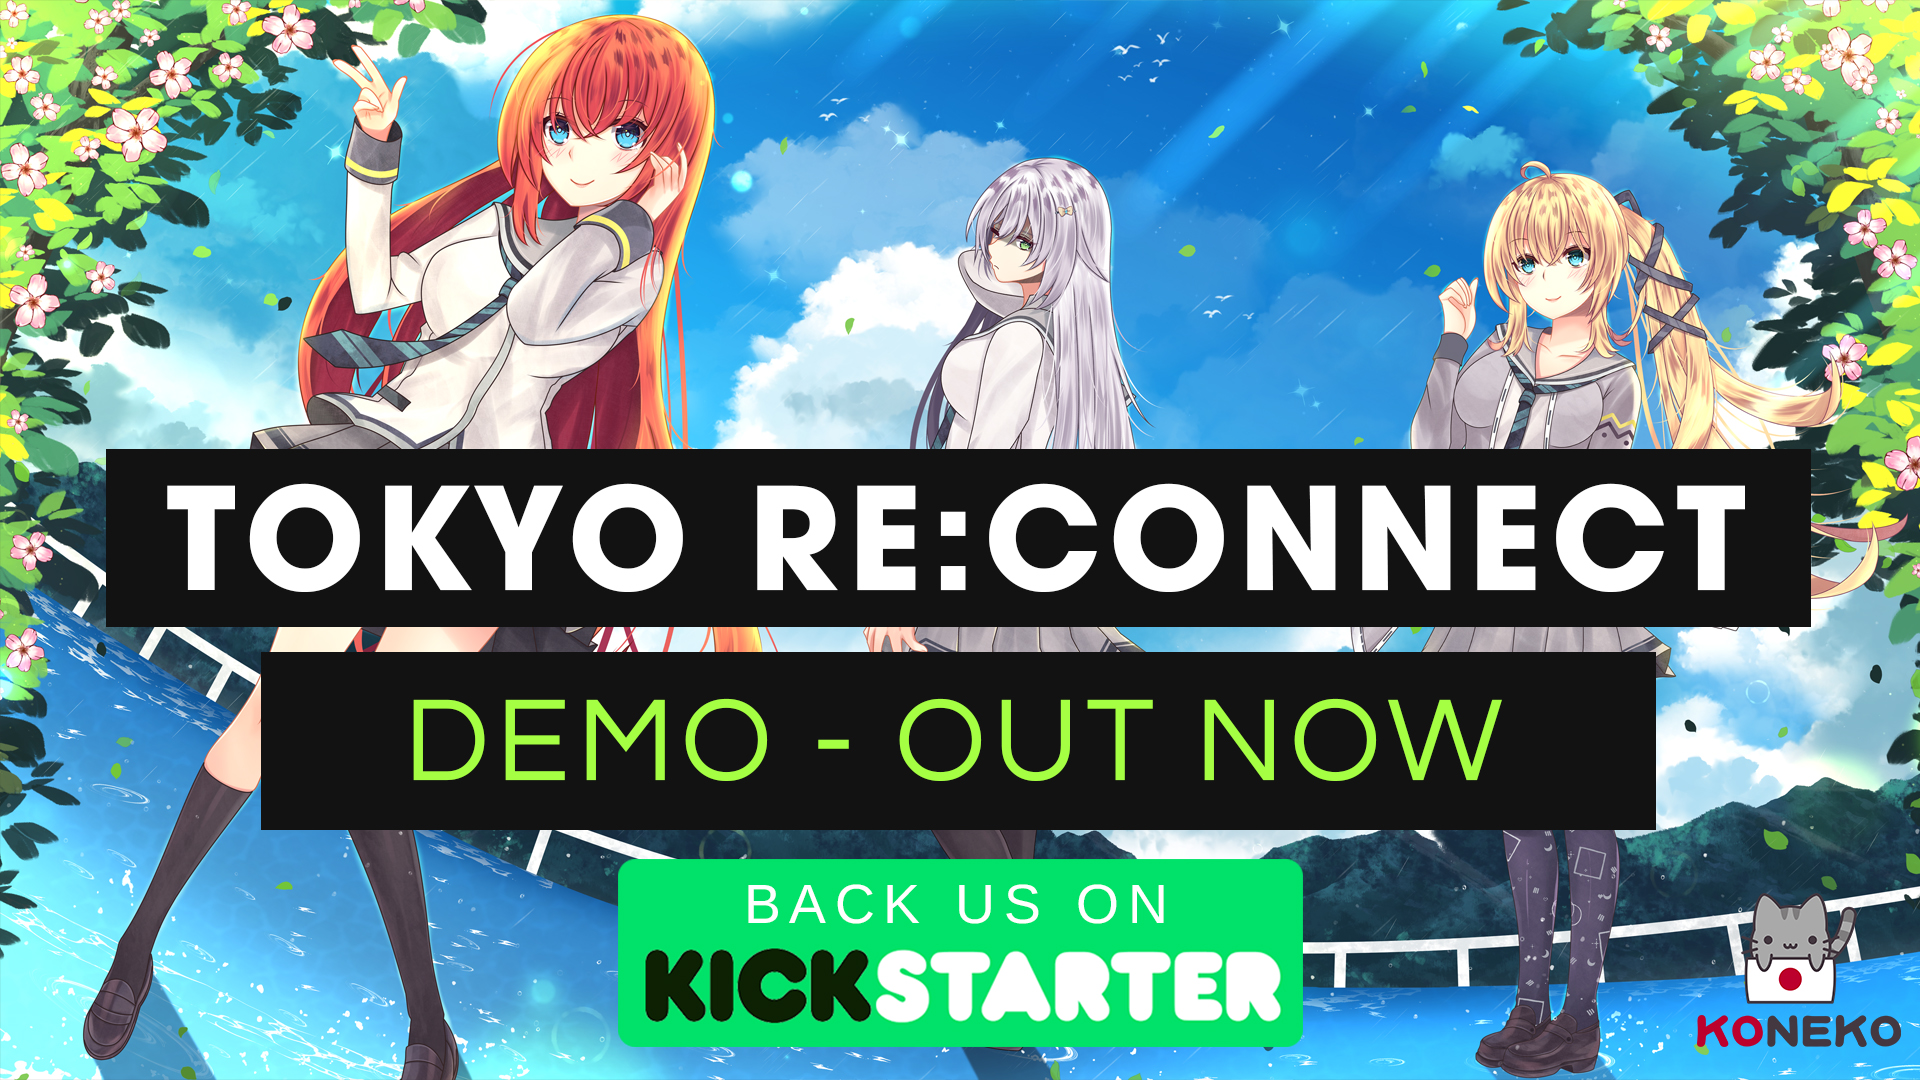 Tokyo Re:Connect - DEMO available now!